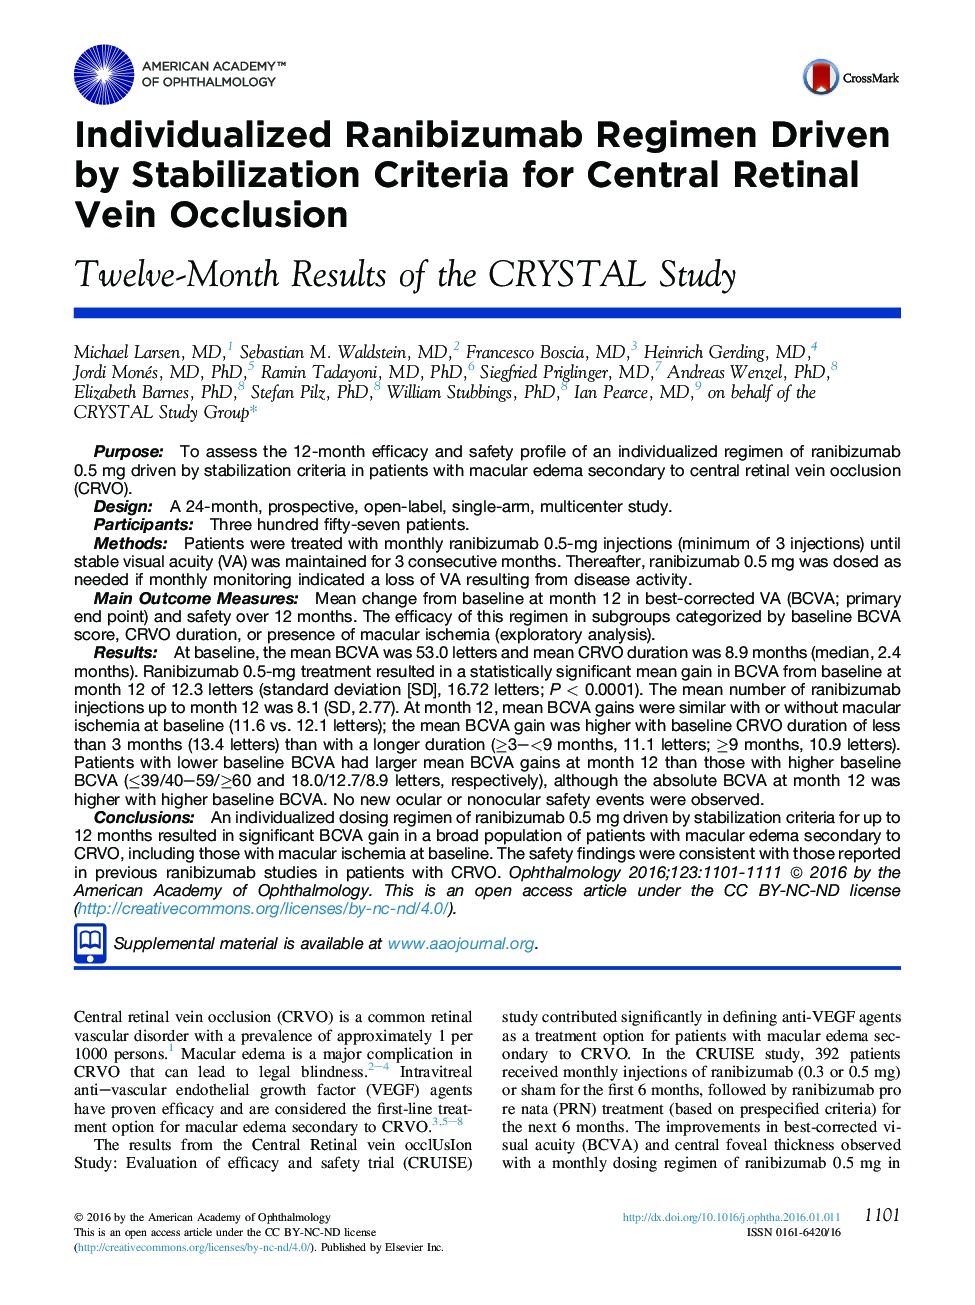 Individualized Ranibizumab Regimen Driven by Stabilization Criteria for Central Retinal Vein Occlusion: Twelve-Month Results of the CRYSTAL Study